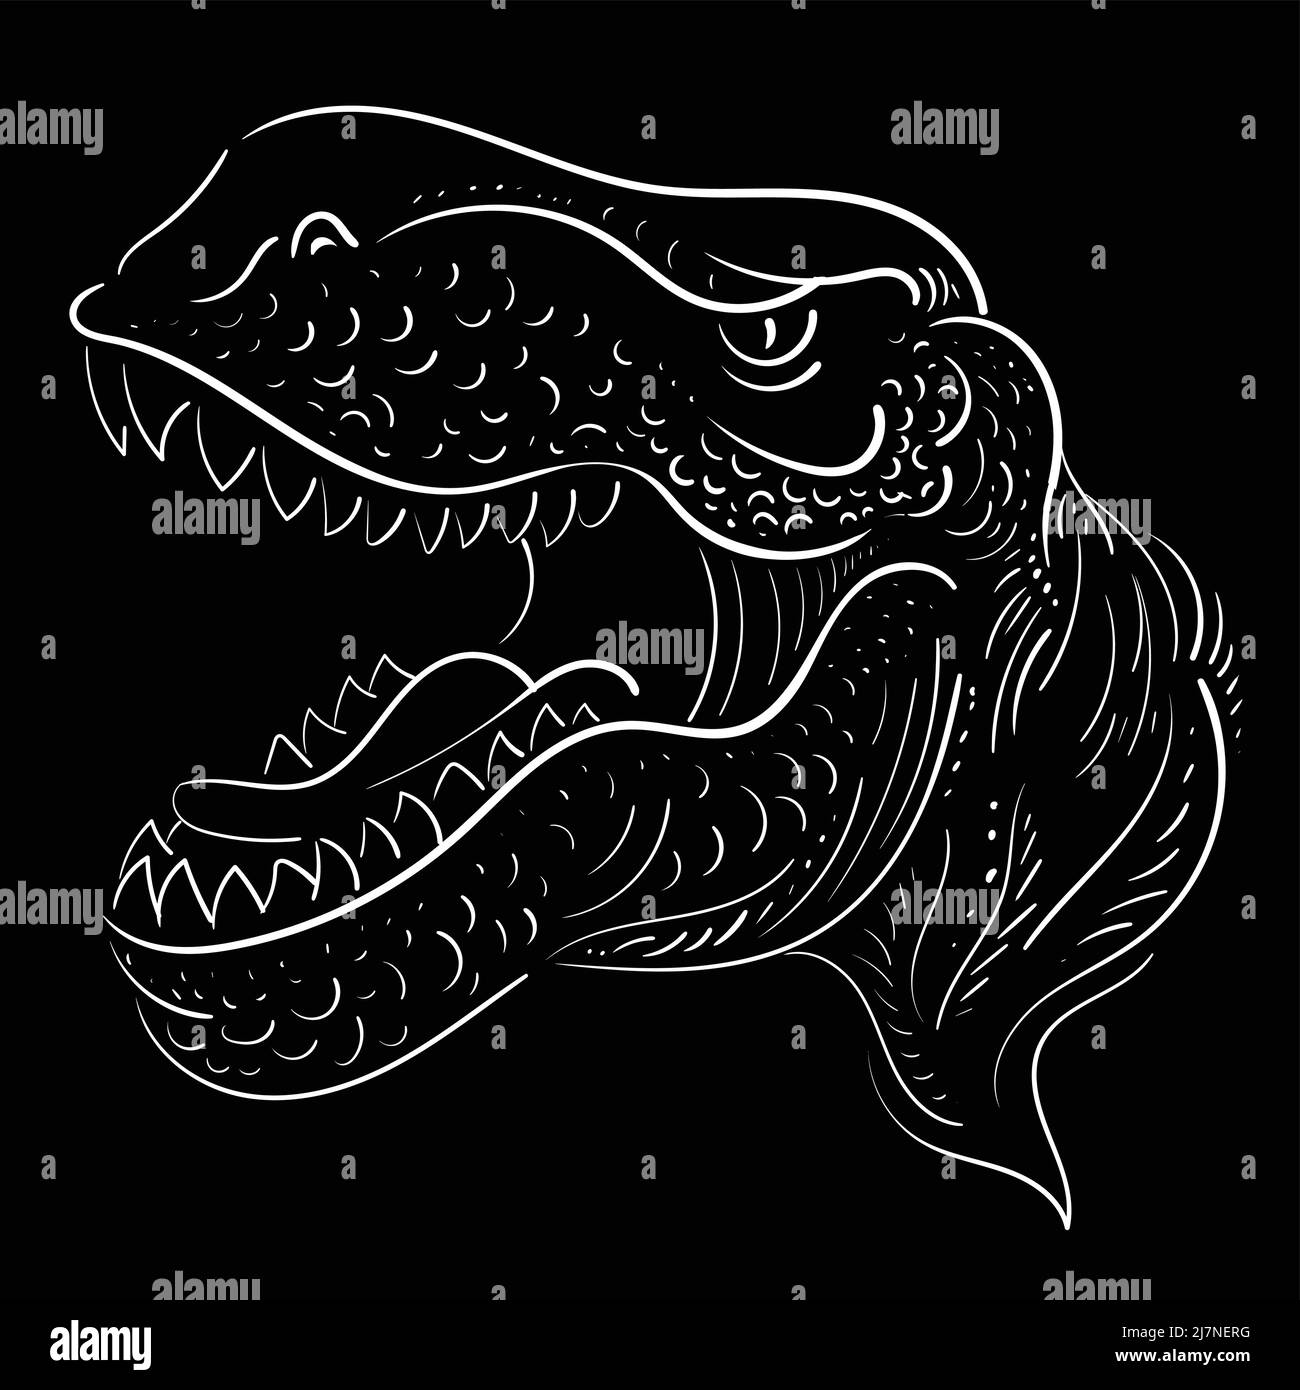 The Vector logo dragon or dinosaur on black cloth for T-shirt print  design or outwear.  Hunting style reptile background. This drawing would be nice Stock Vector